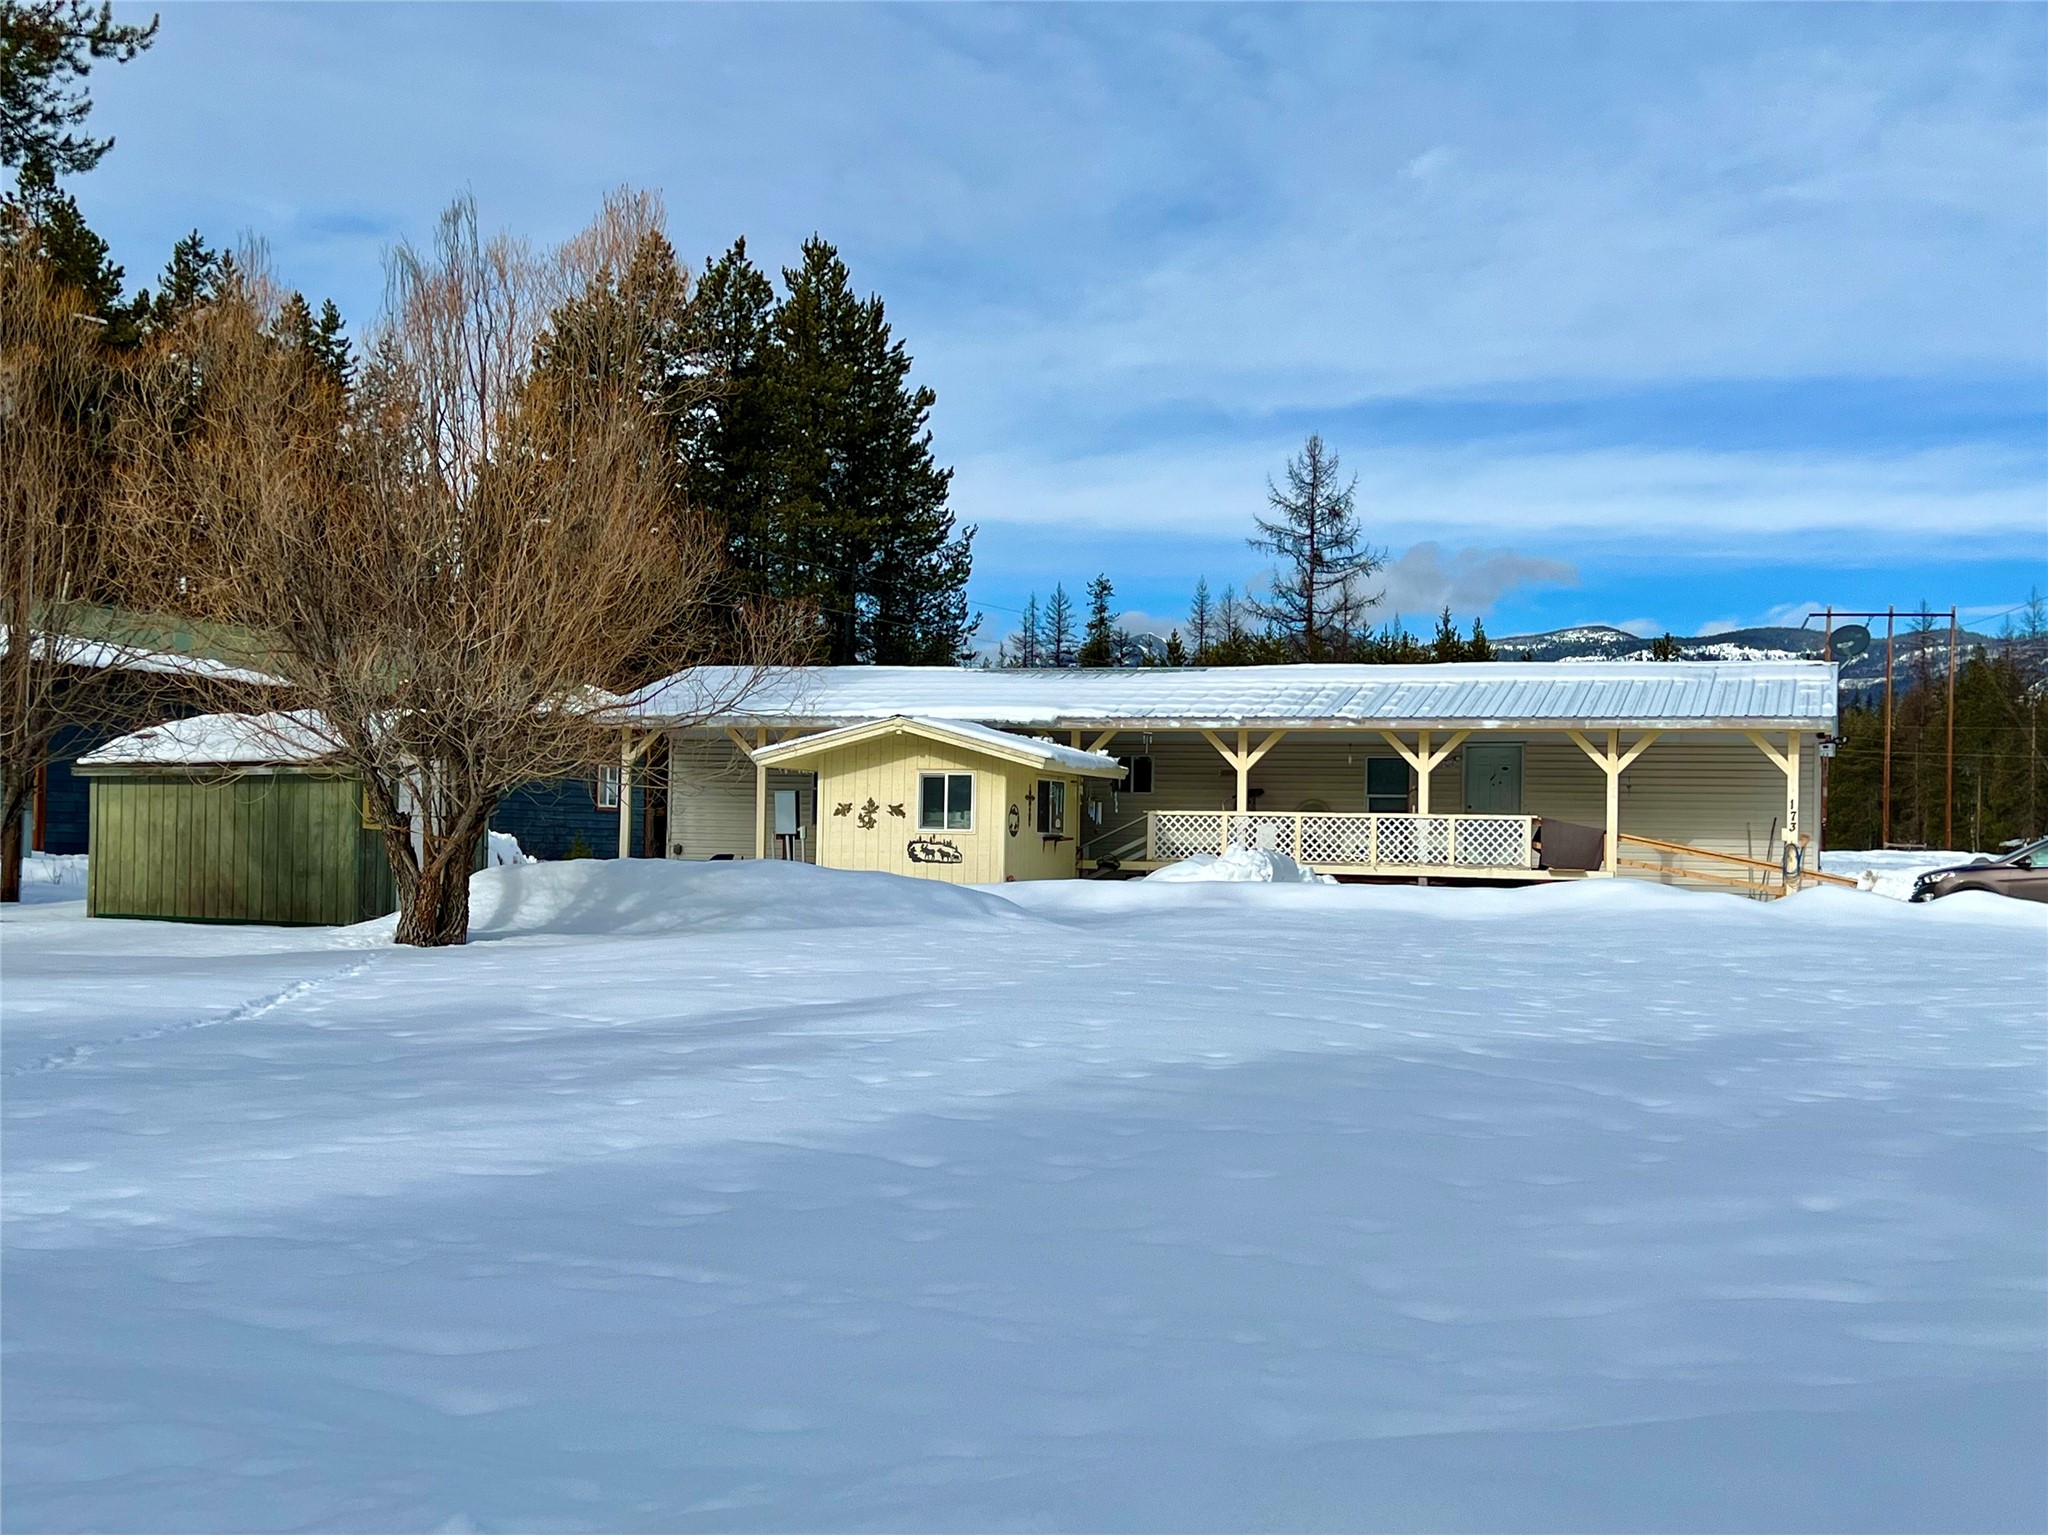 Check out this 2 Bedroom 2 Bathroom Manufactured Home on 1.5 acres in Olney Montana situated between Whitefish and Eureka. This is a well cared for dwelling with a very nice floor plan offering a Bedroom and bath on each end of the home with a roomy open floor plan and a vaulted ceiling in the Living room. Being Located between Down Town Whitefish and Eureka allow for  access to all of the Incredible Amenities Northwest Montana is so well known for. Included in the Photos section are just a few images of many of the Fun recreation choices the area has to offer. If it is Fishing, Kayaking, Golfing, Skiing and Snow Biking, Hiking just to name a few, The options are endless. For More Information about this property please call Trini Carreon at 406 270-6688 or your real estate professional.